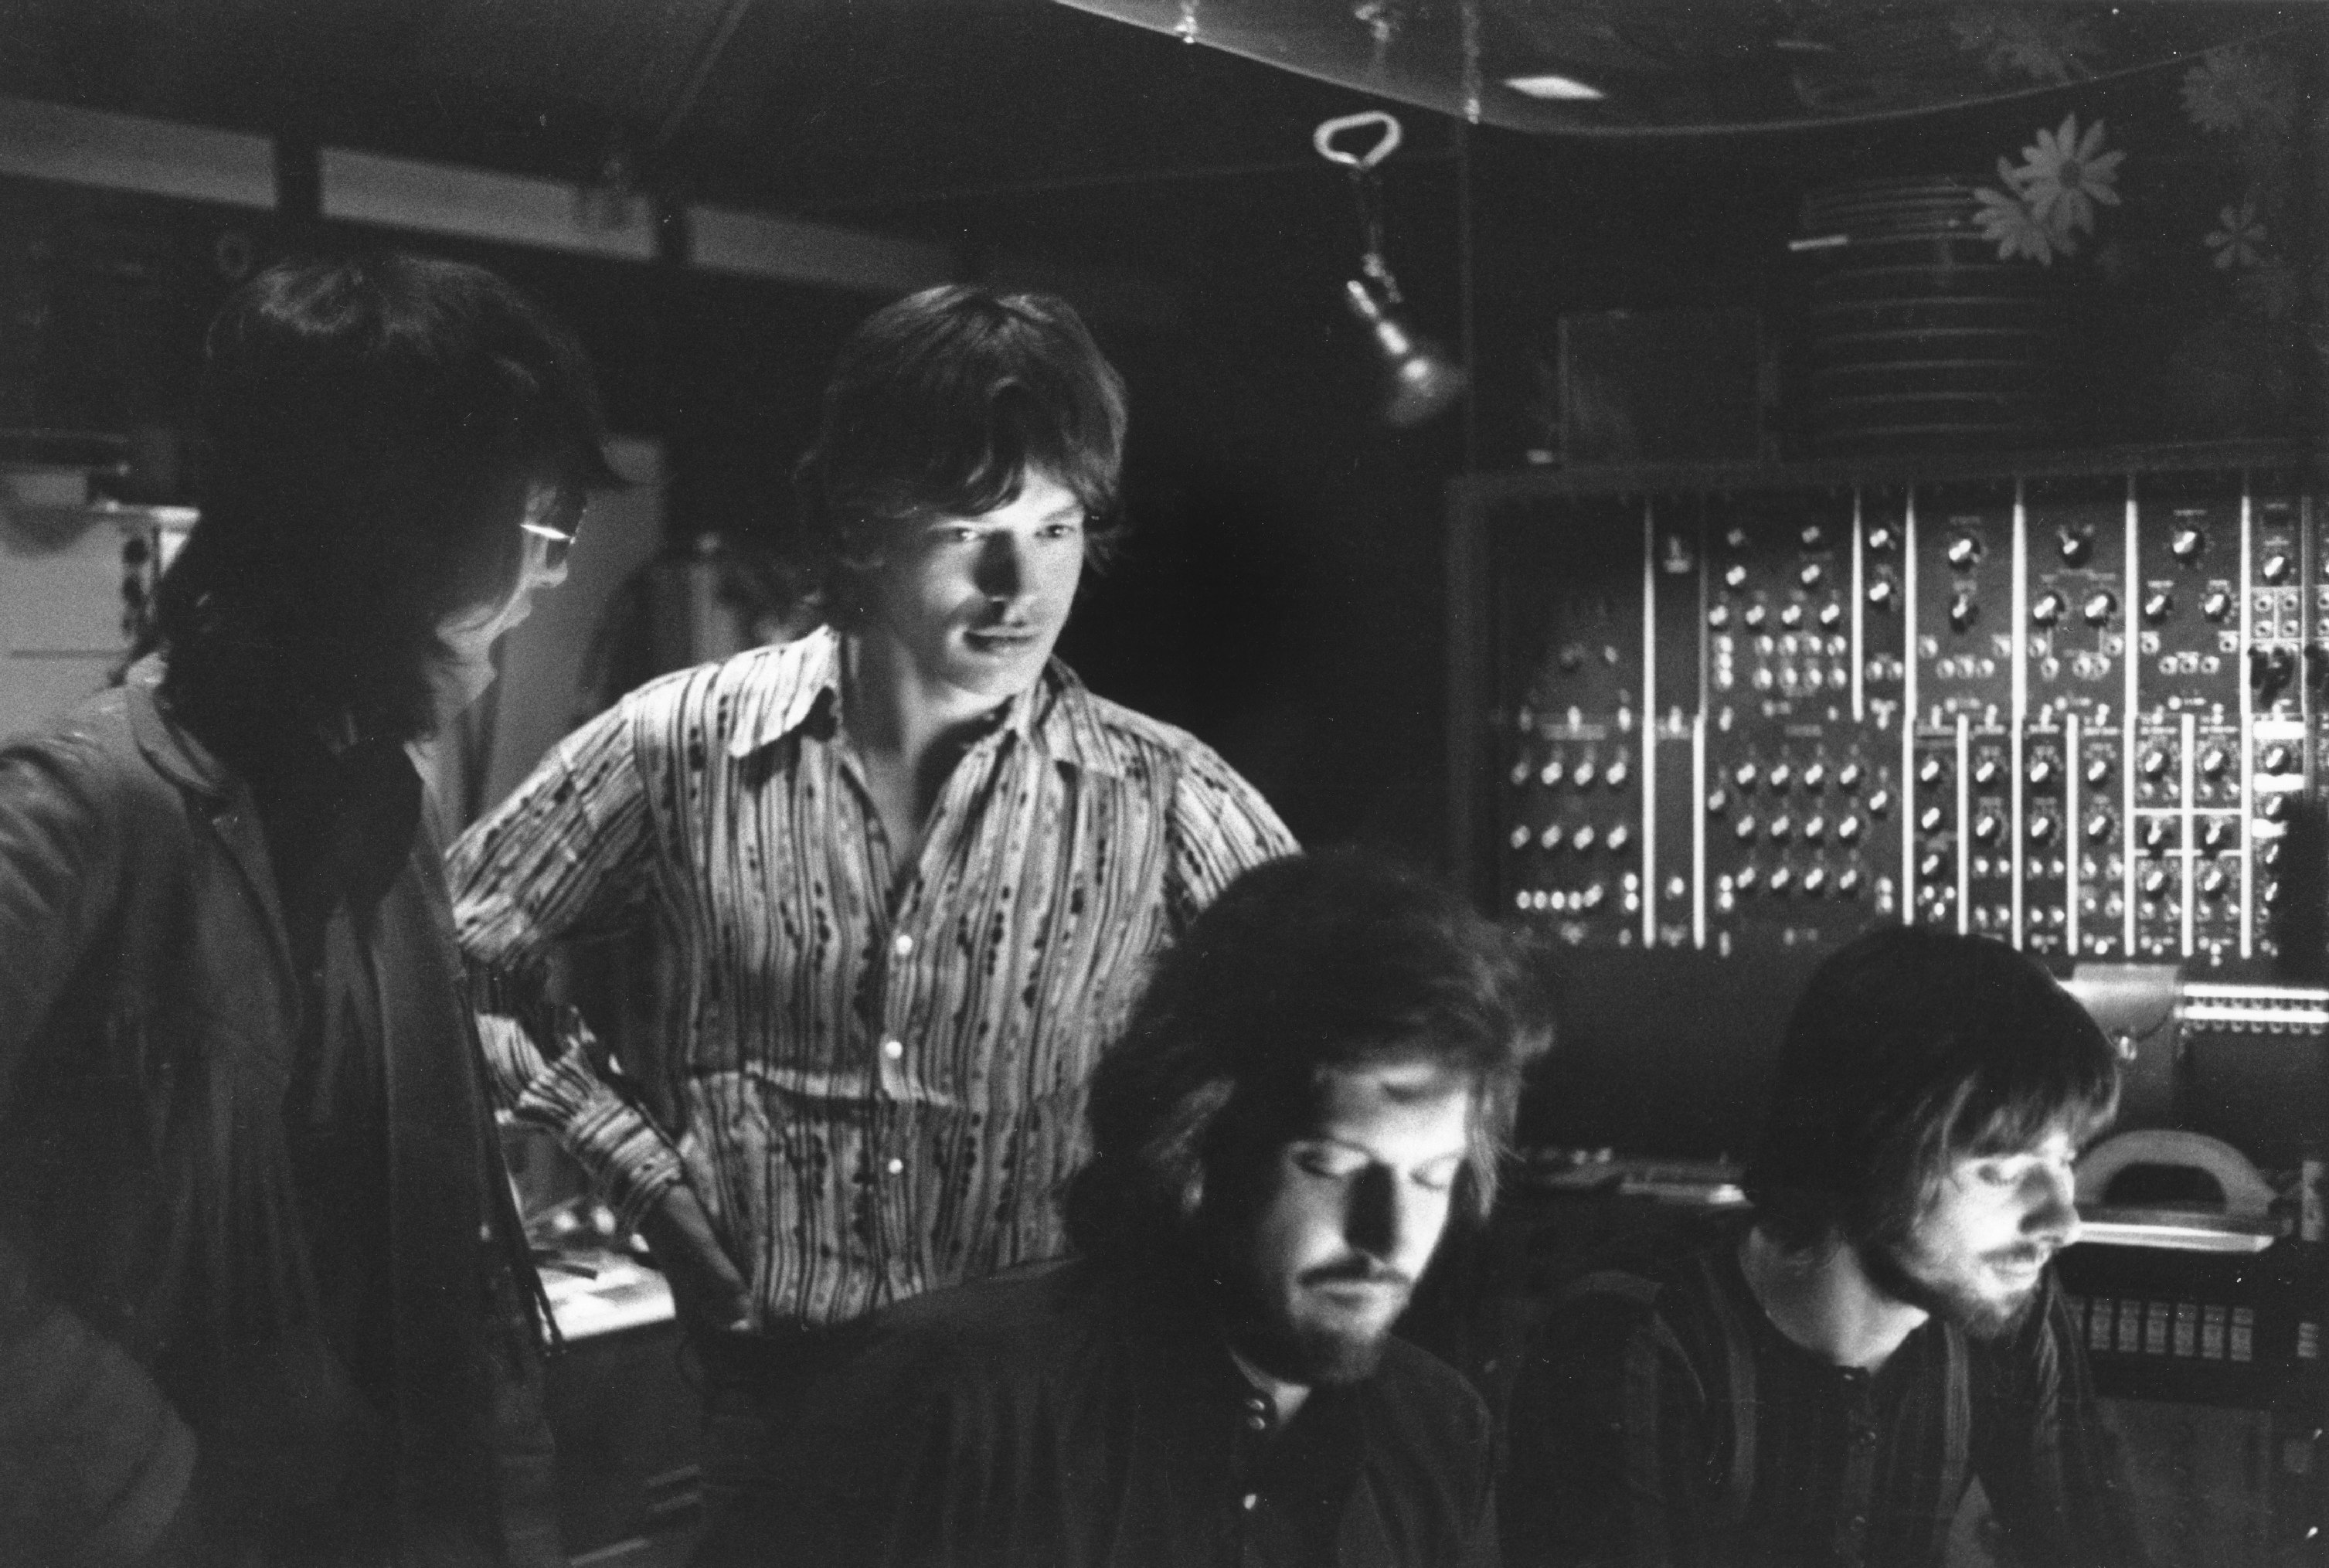 Mick Jagger and others in a studio